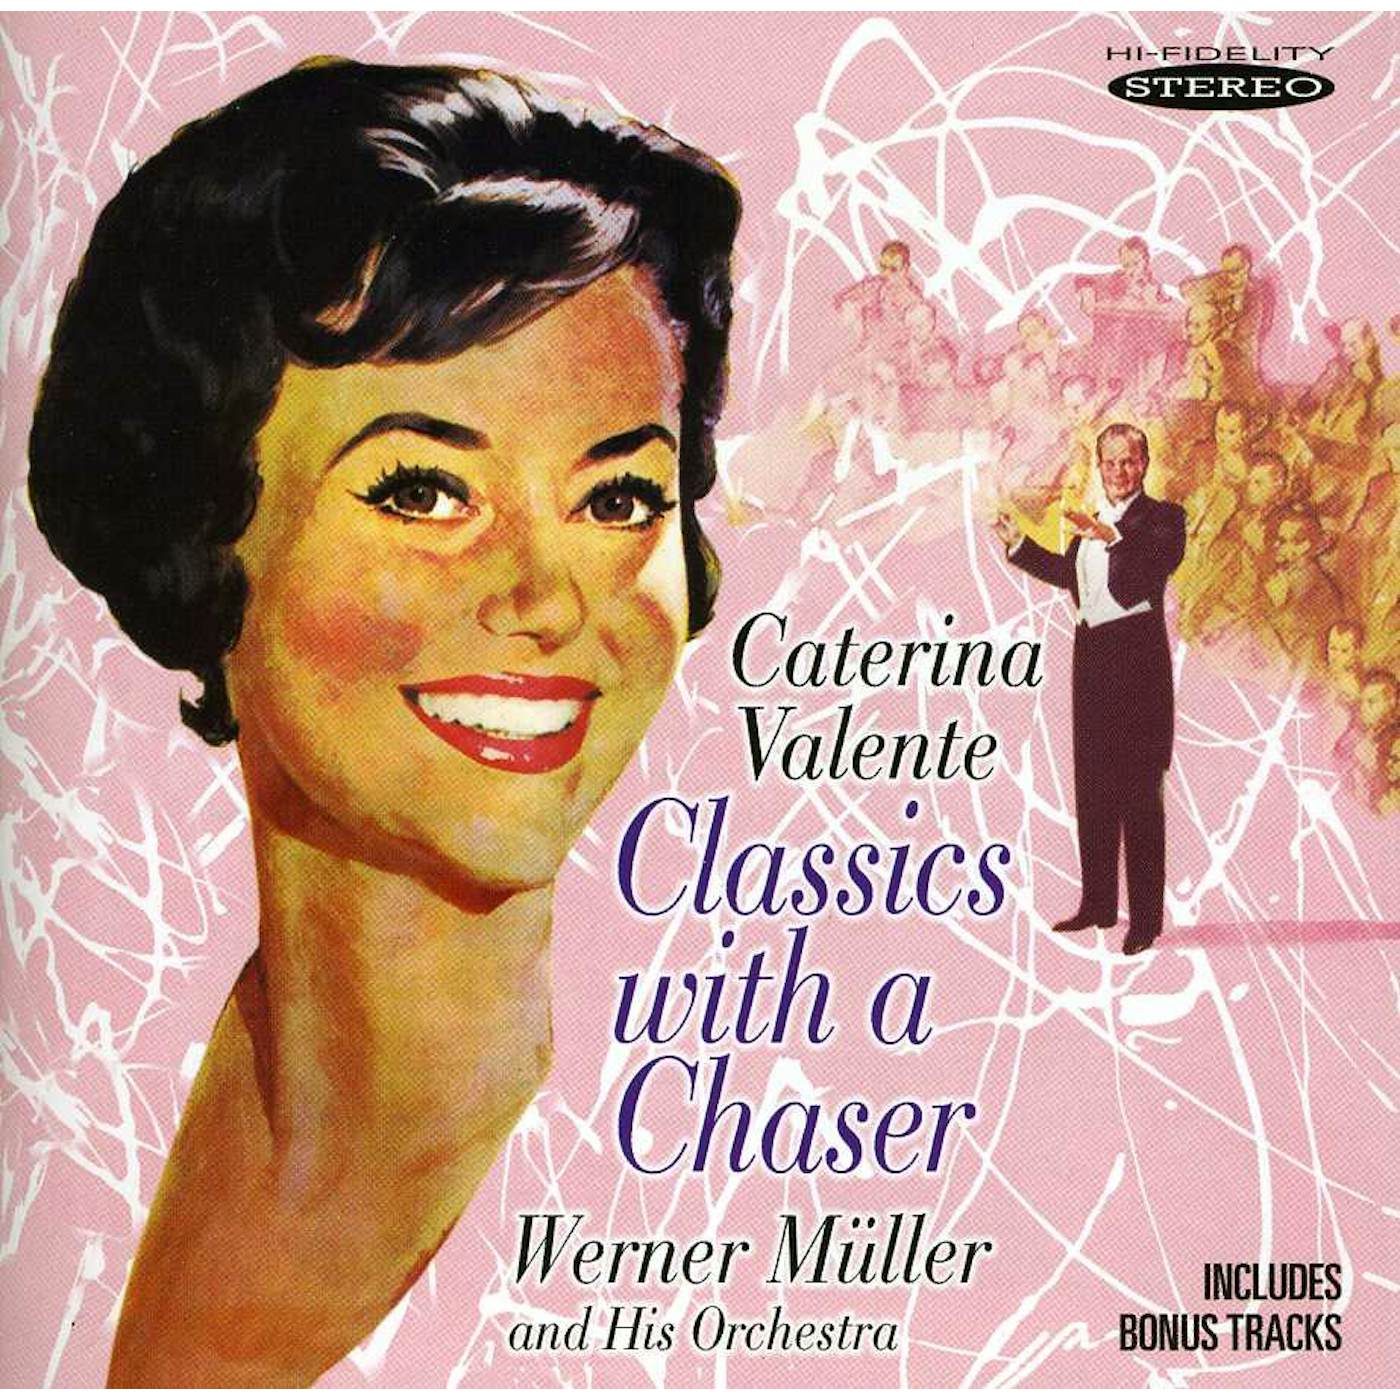 Caterina Valente CLASSICS WITH A CHASER CD